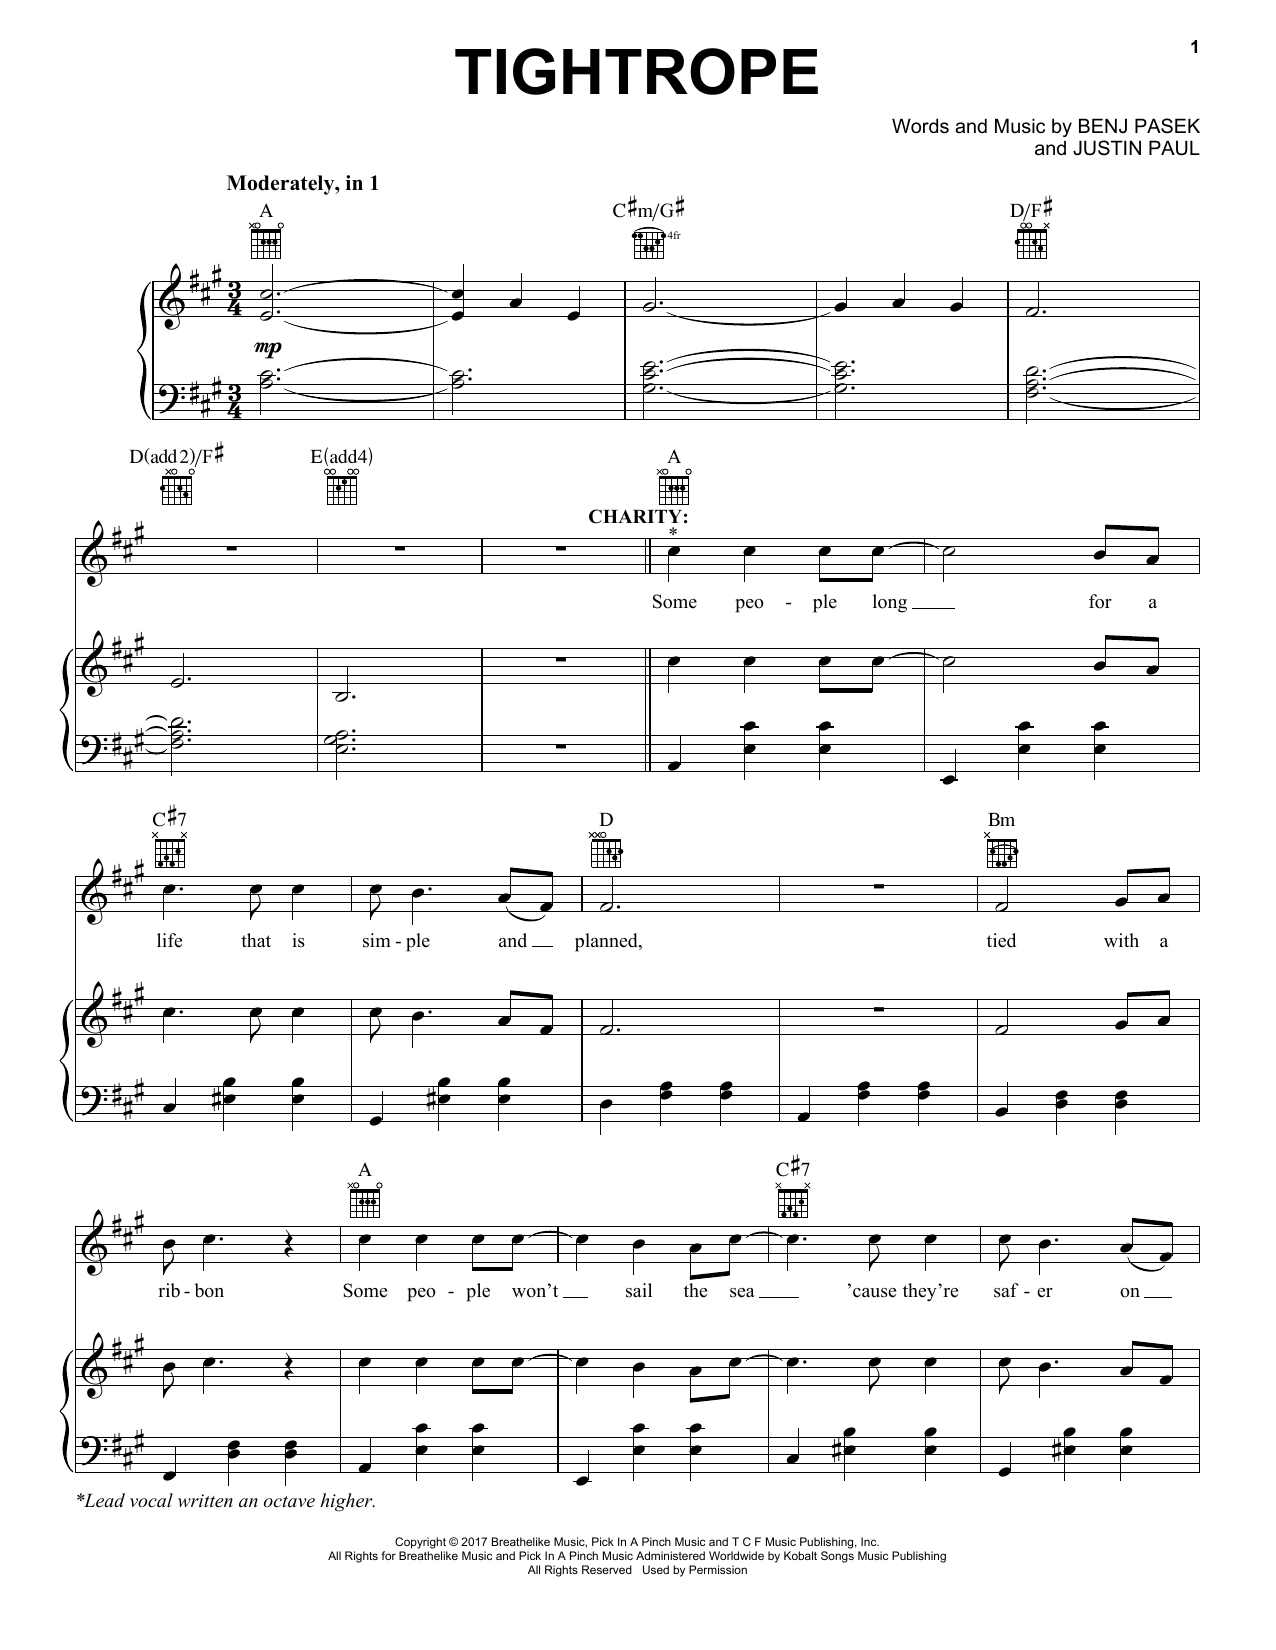 Download Pasek & Paul Tightrope (from The Greatest Showman) Sheet Music